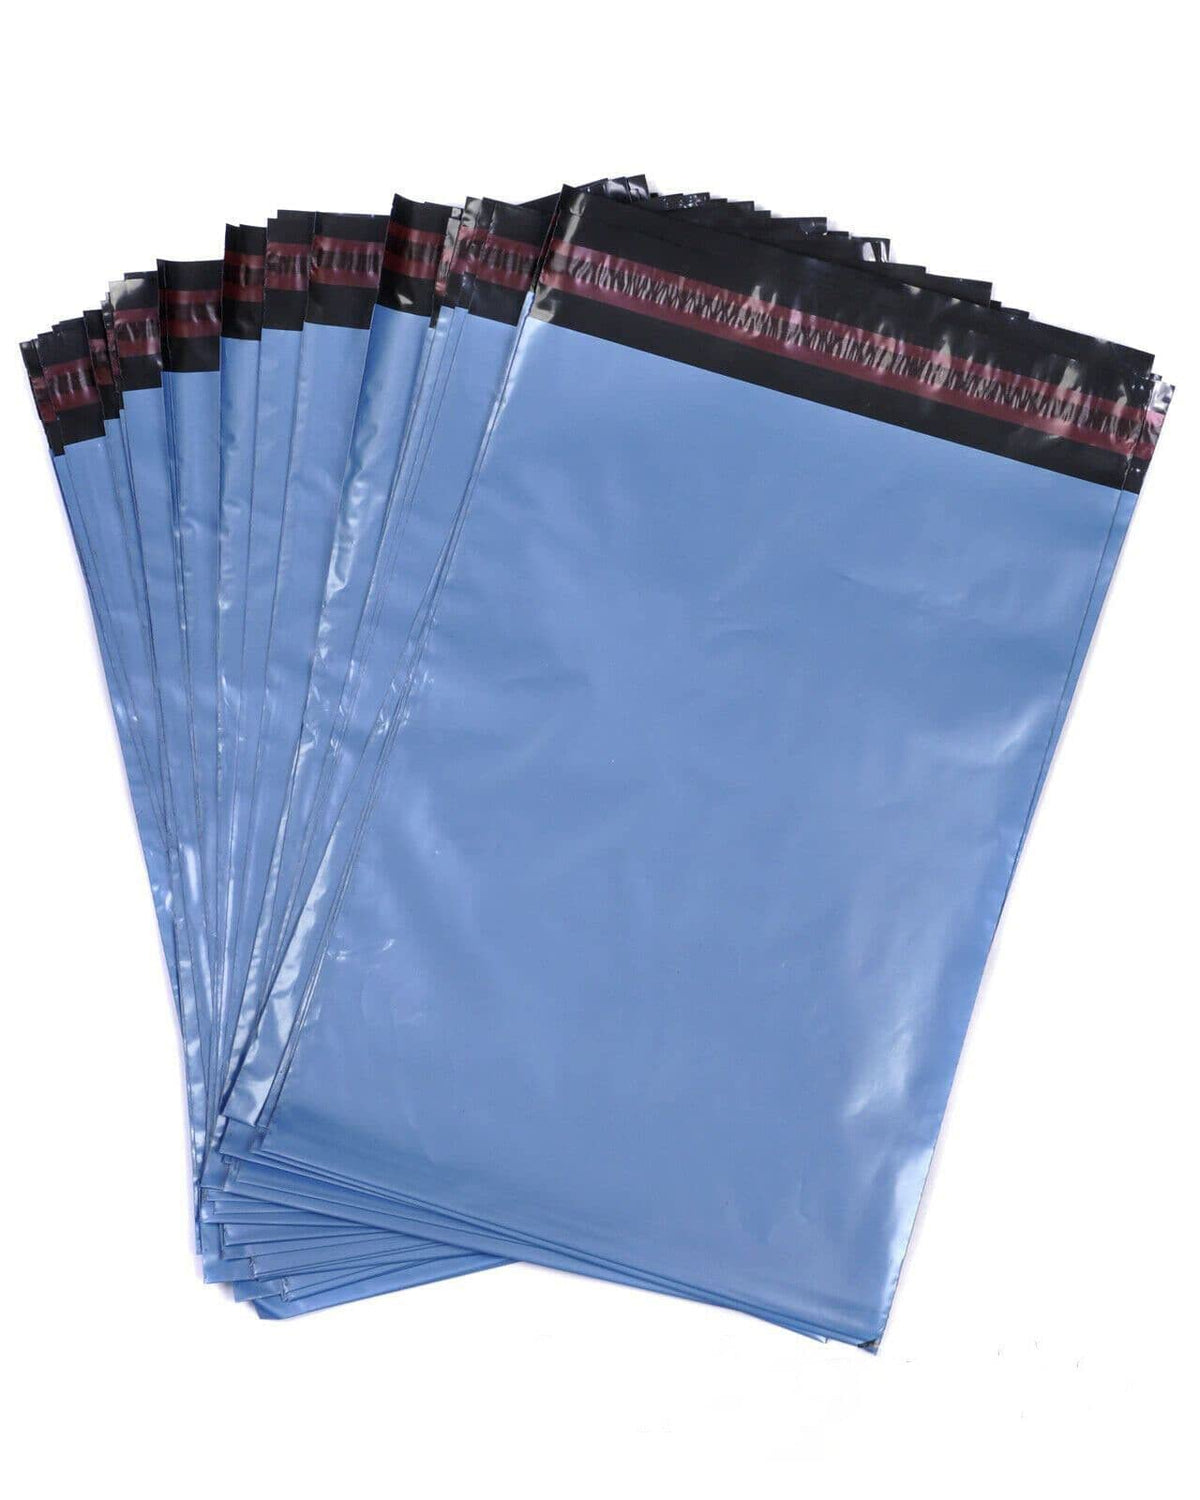 Mailing Bags - Blue Self Seal Envelopes 250mm x 350mm - 10 inches x 14 inches - Pack of 20